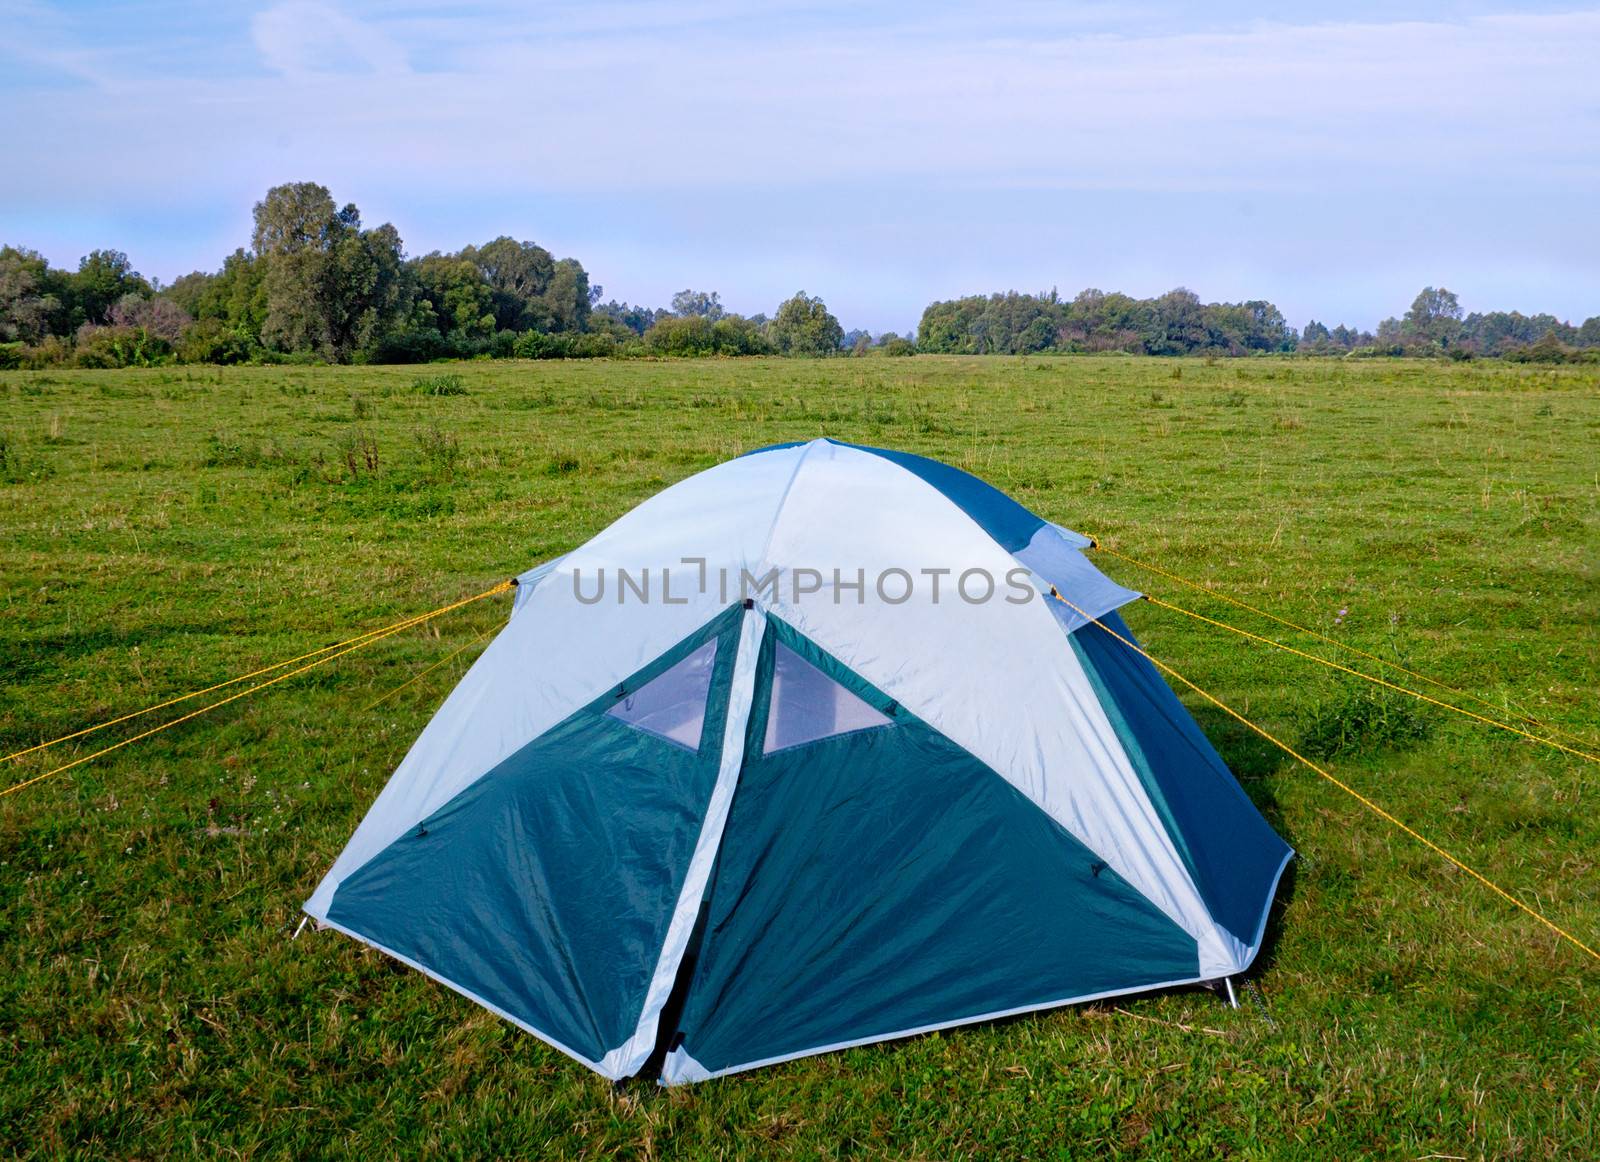 Practical single camping tent of blue-white color on the green meadow by the river.
